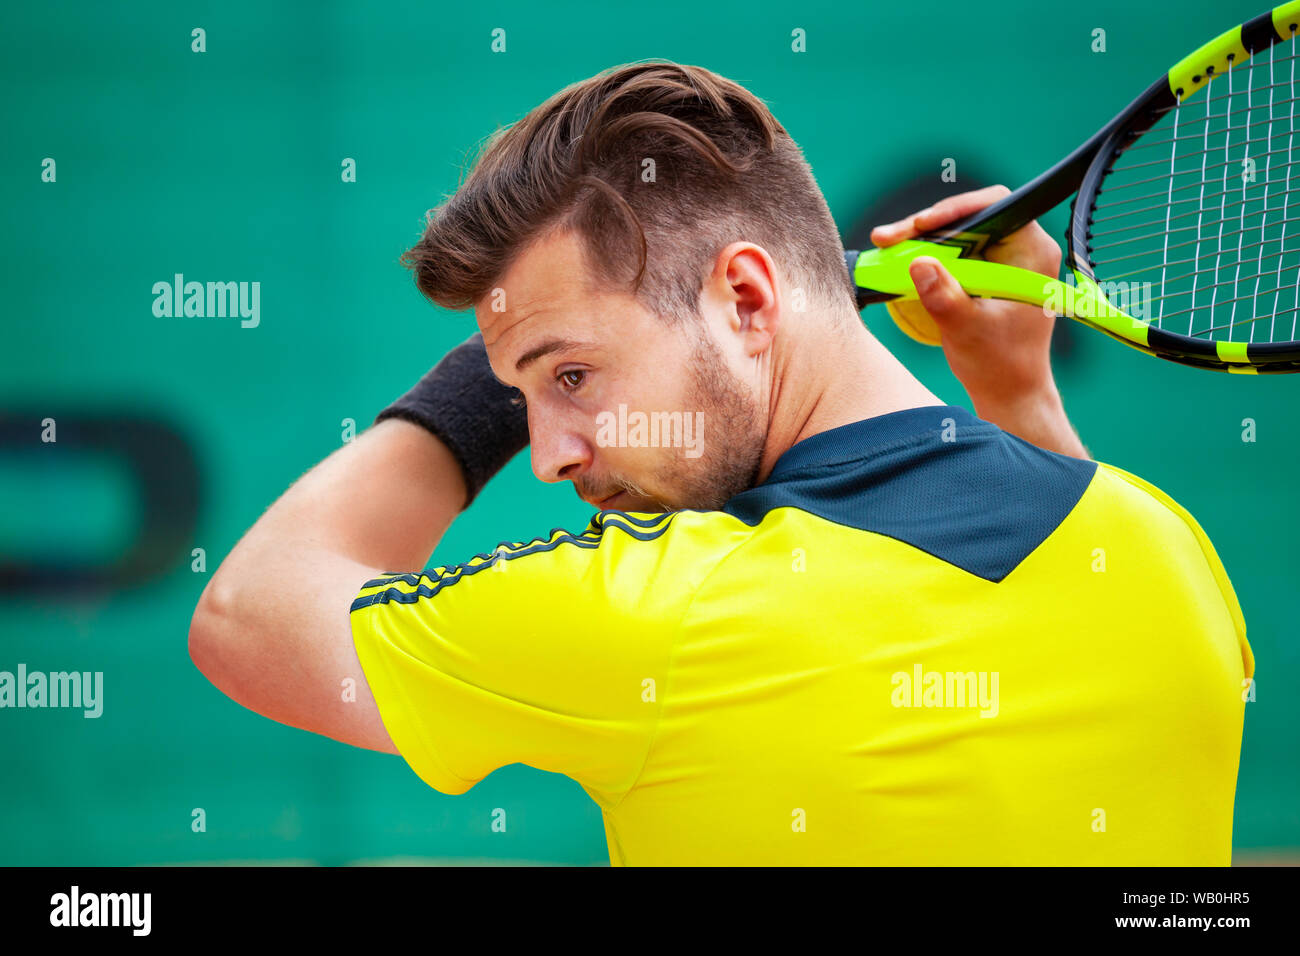 Left handed male tennis player holding racket ready to play tennis Stock  Photo - Alamy